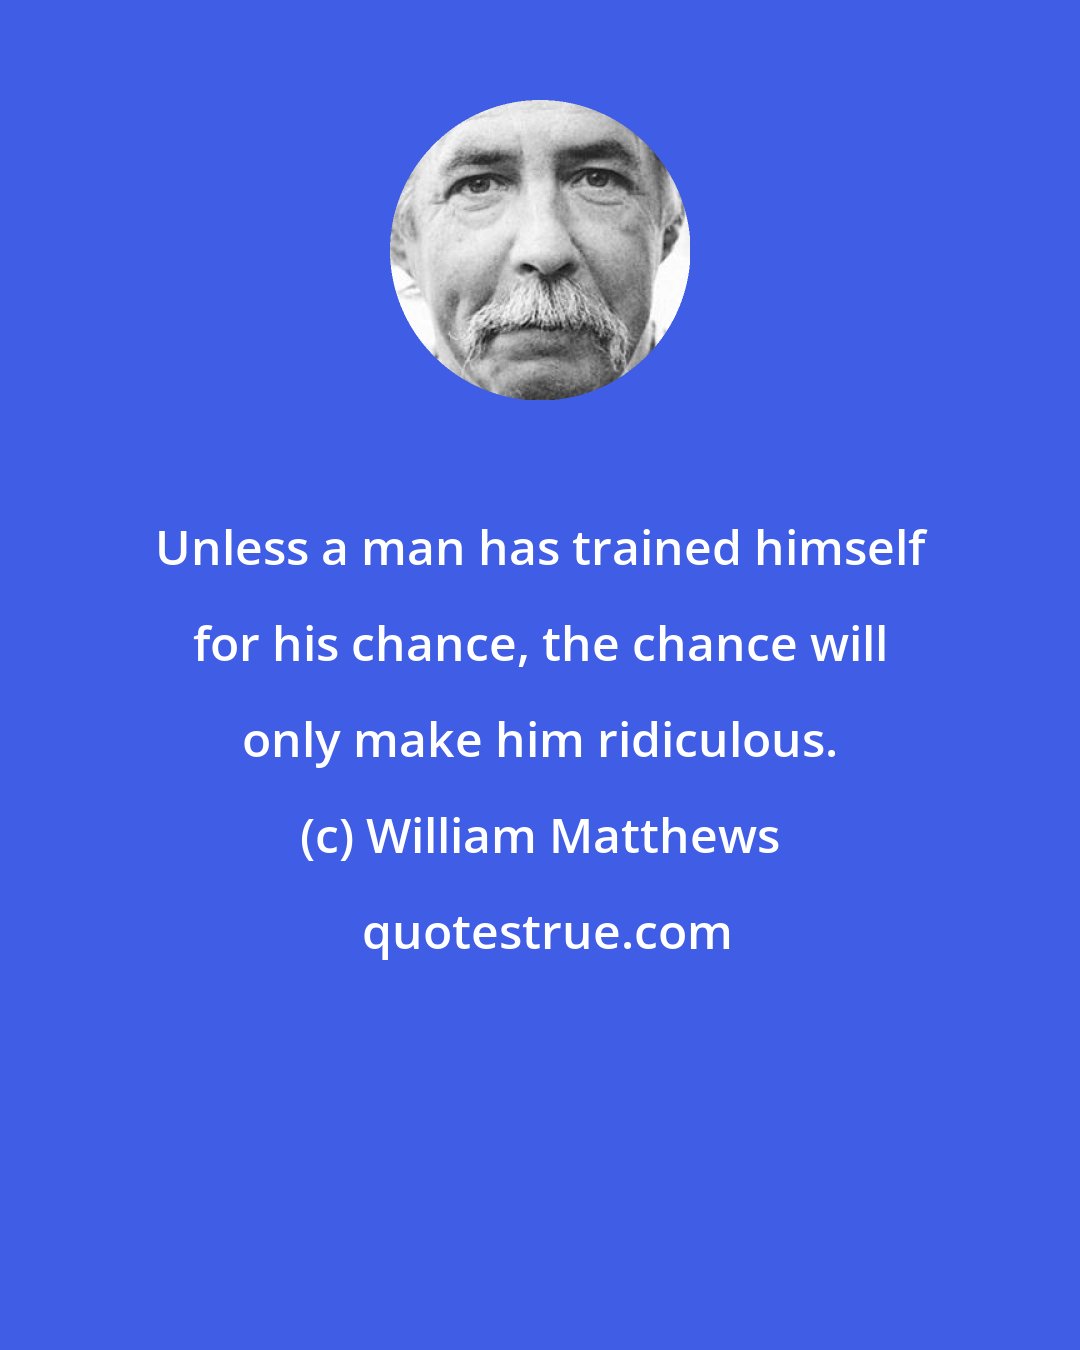 William Matthews: Unless a man has trained himself for his chance, the chance will only make him ridiculous.